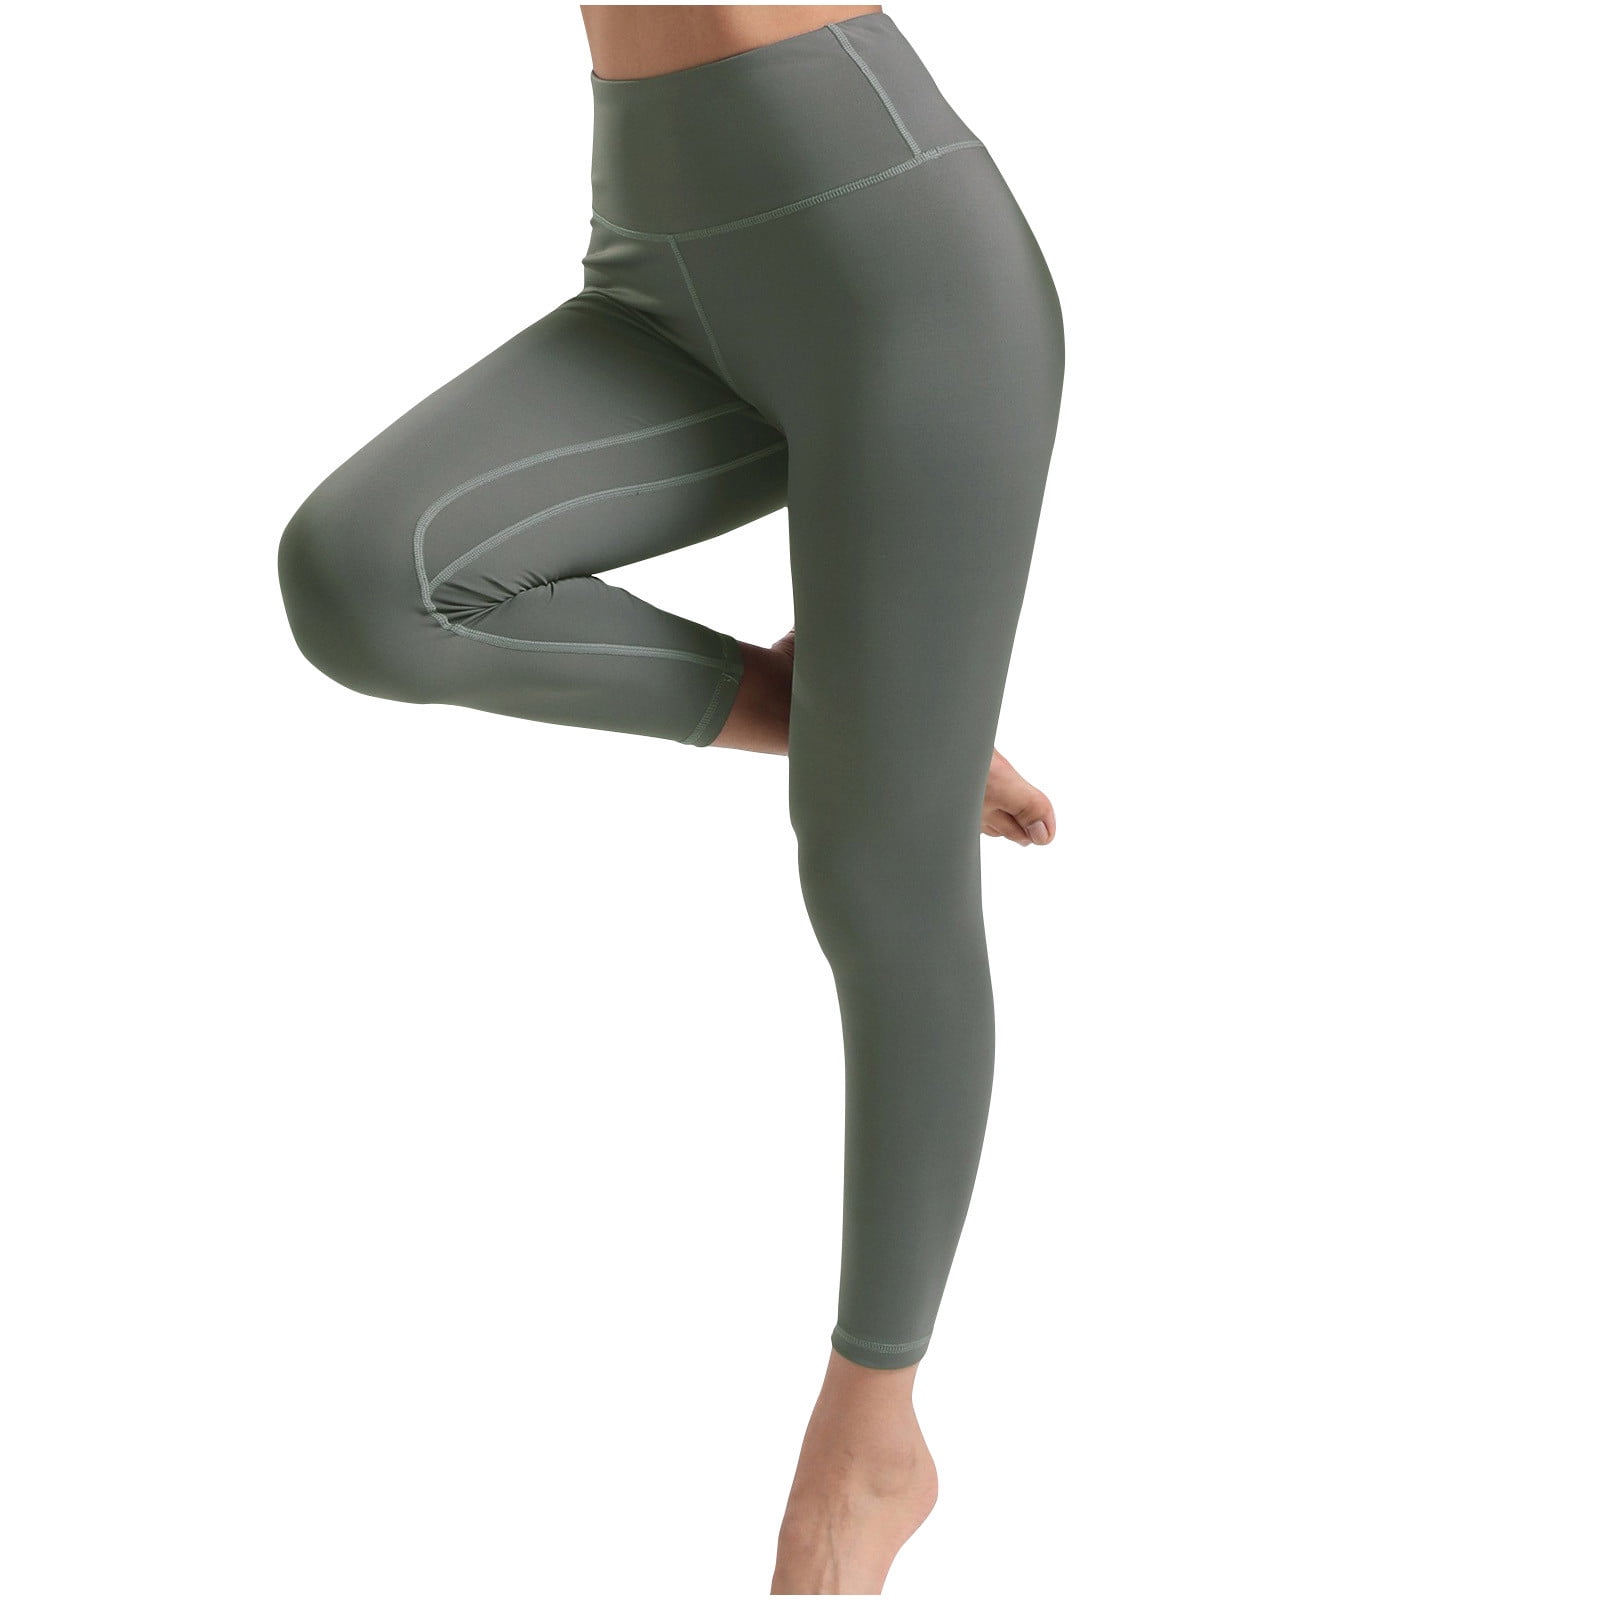 Xersion Women's Brand Gray Striped Fitted Yoga Leggings Size Medium - $8  (80% Off Retail) - From Serenity